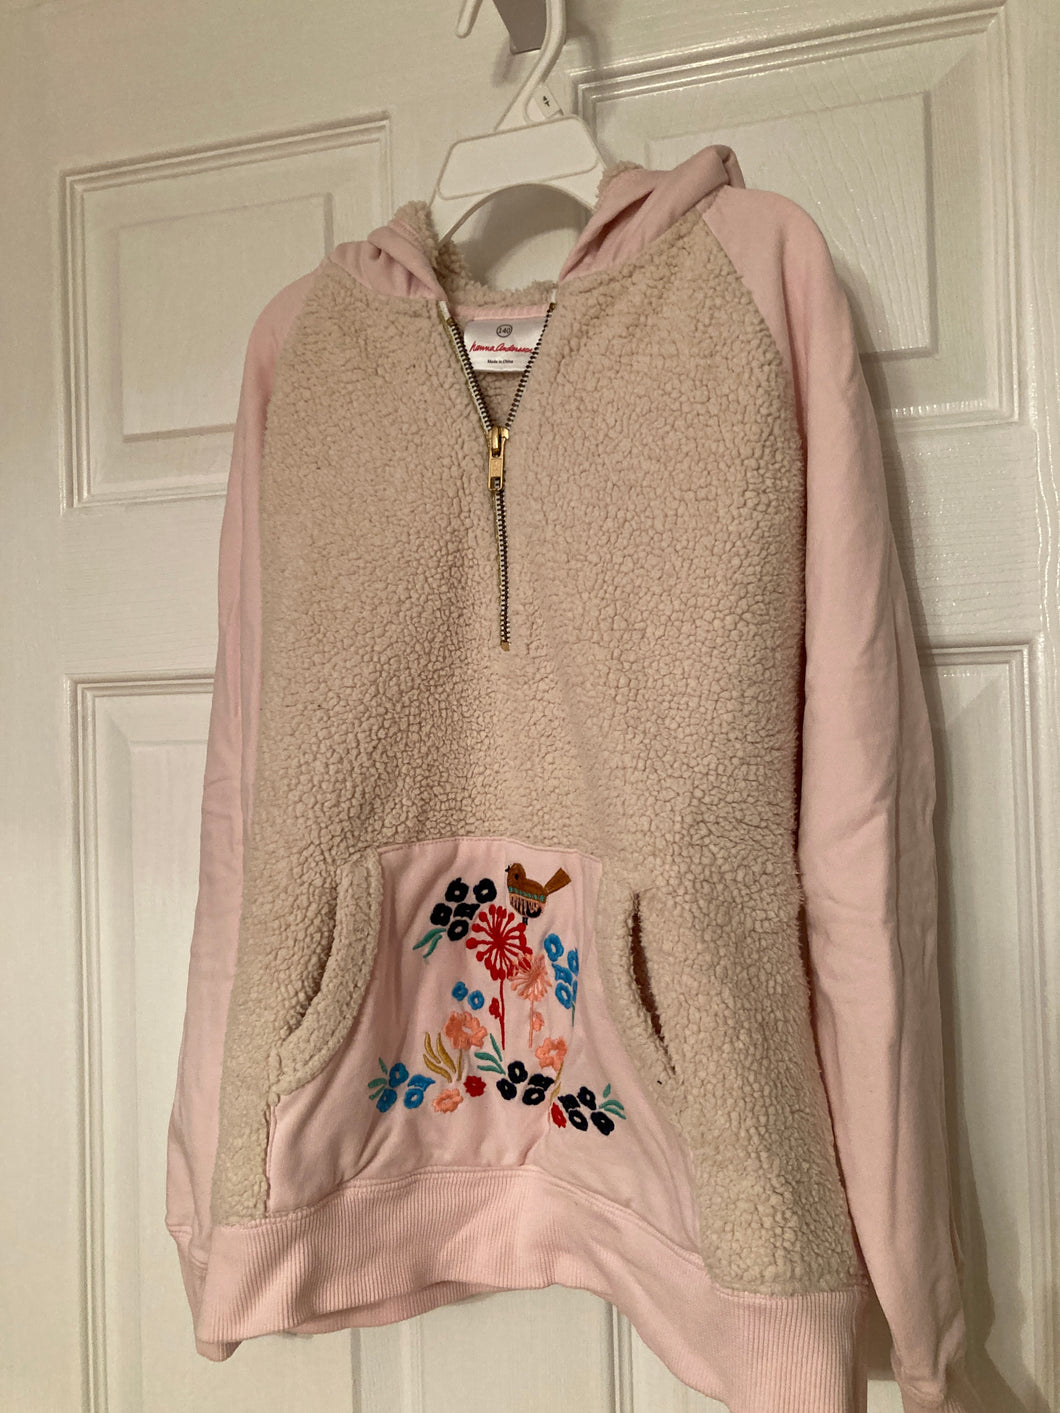 Hanna Andersson sweatshirt with fleece front body, embroidered front pocket 10